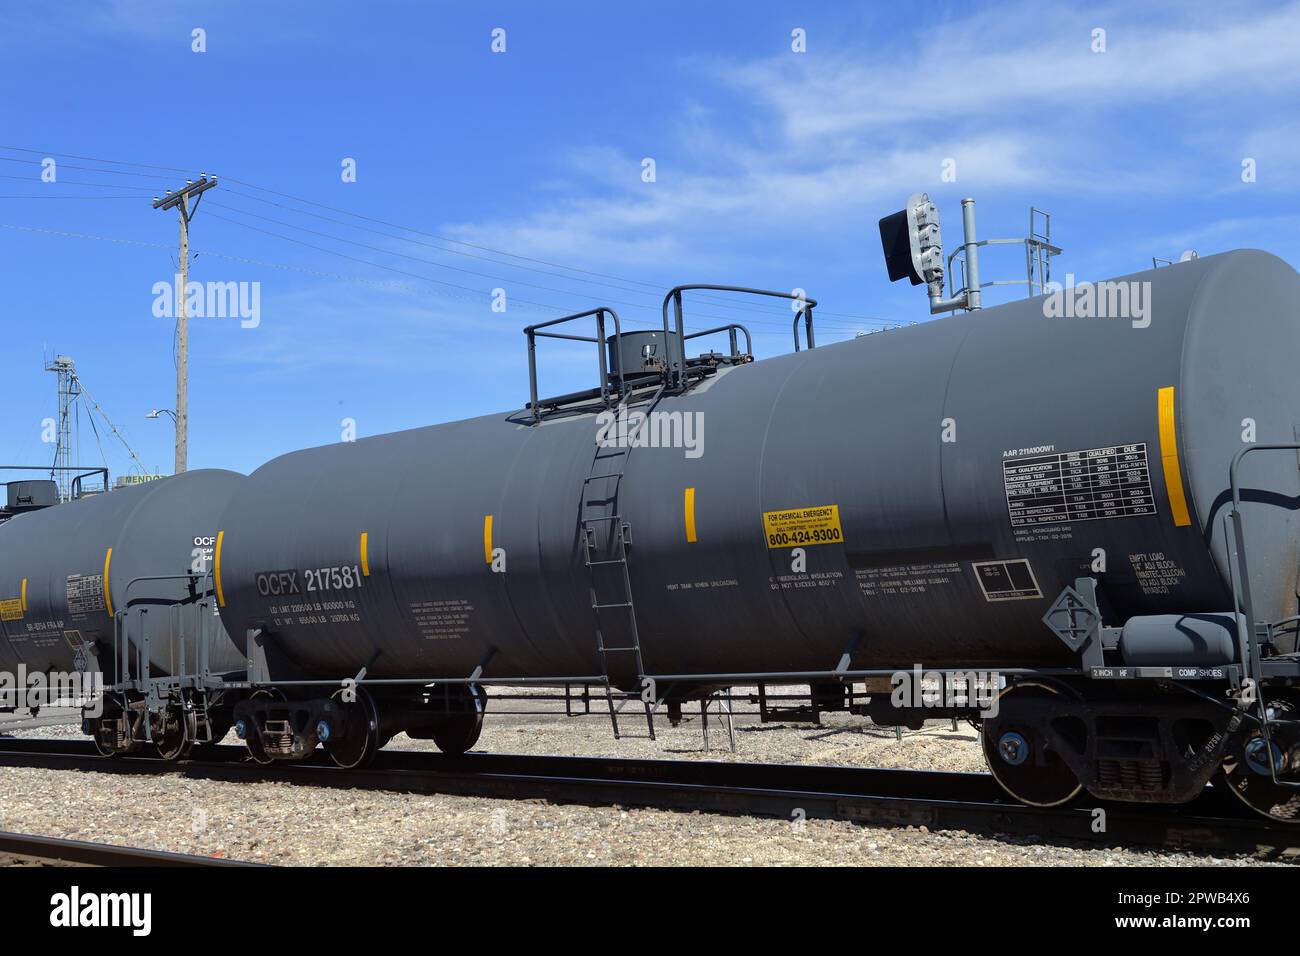 Mendota, Illinois, USA. A string of tank cars in a freight train passing through a north central Illinois. Stock Photo